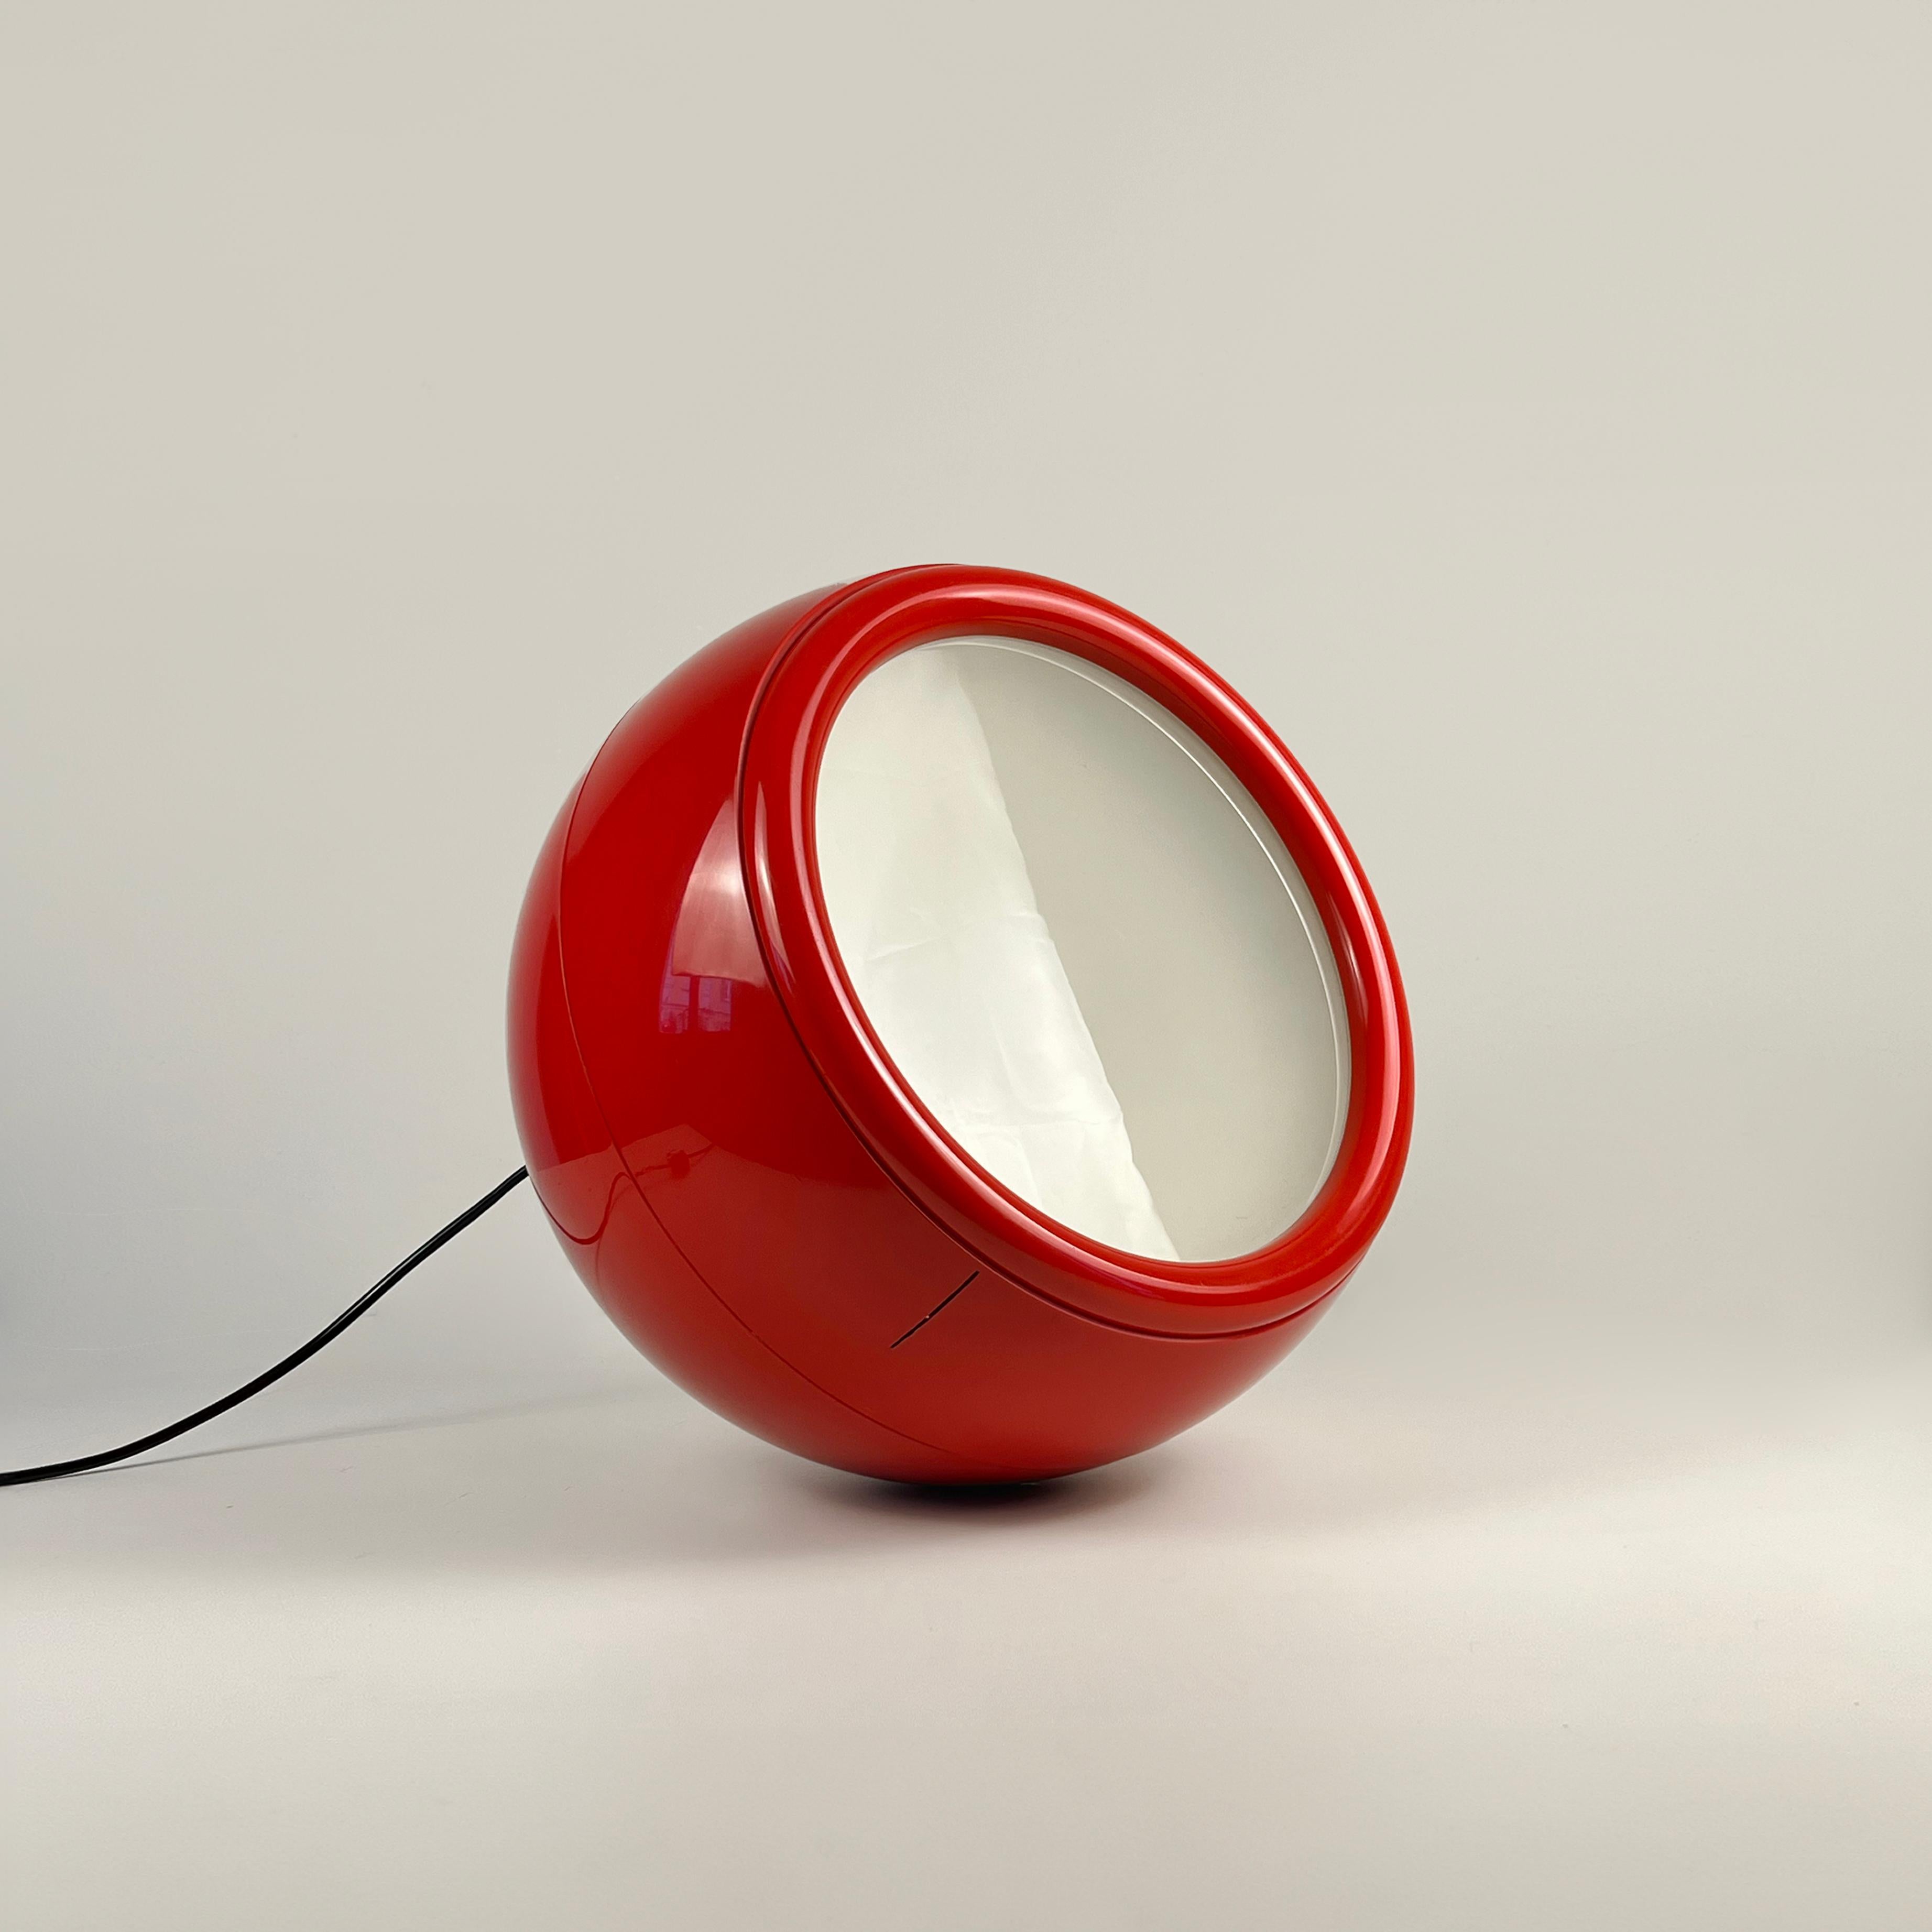 This Pallade floor lamp, designed by Studio Tetrarch in the 1970s, is a rare first edition, coming in a beautiful red color and featuring its original switch marked by Artemide

Diameter: 40 cm (15in)
E27 bulb socket
